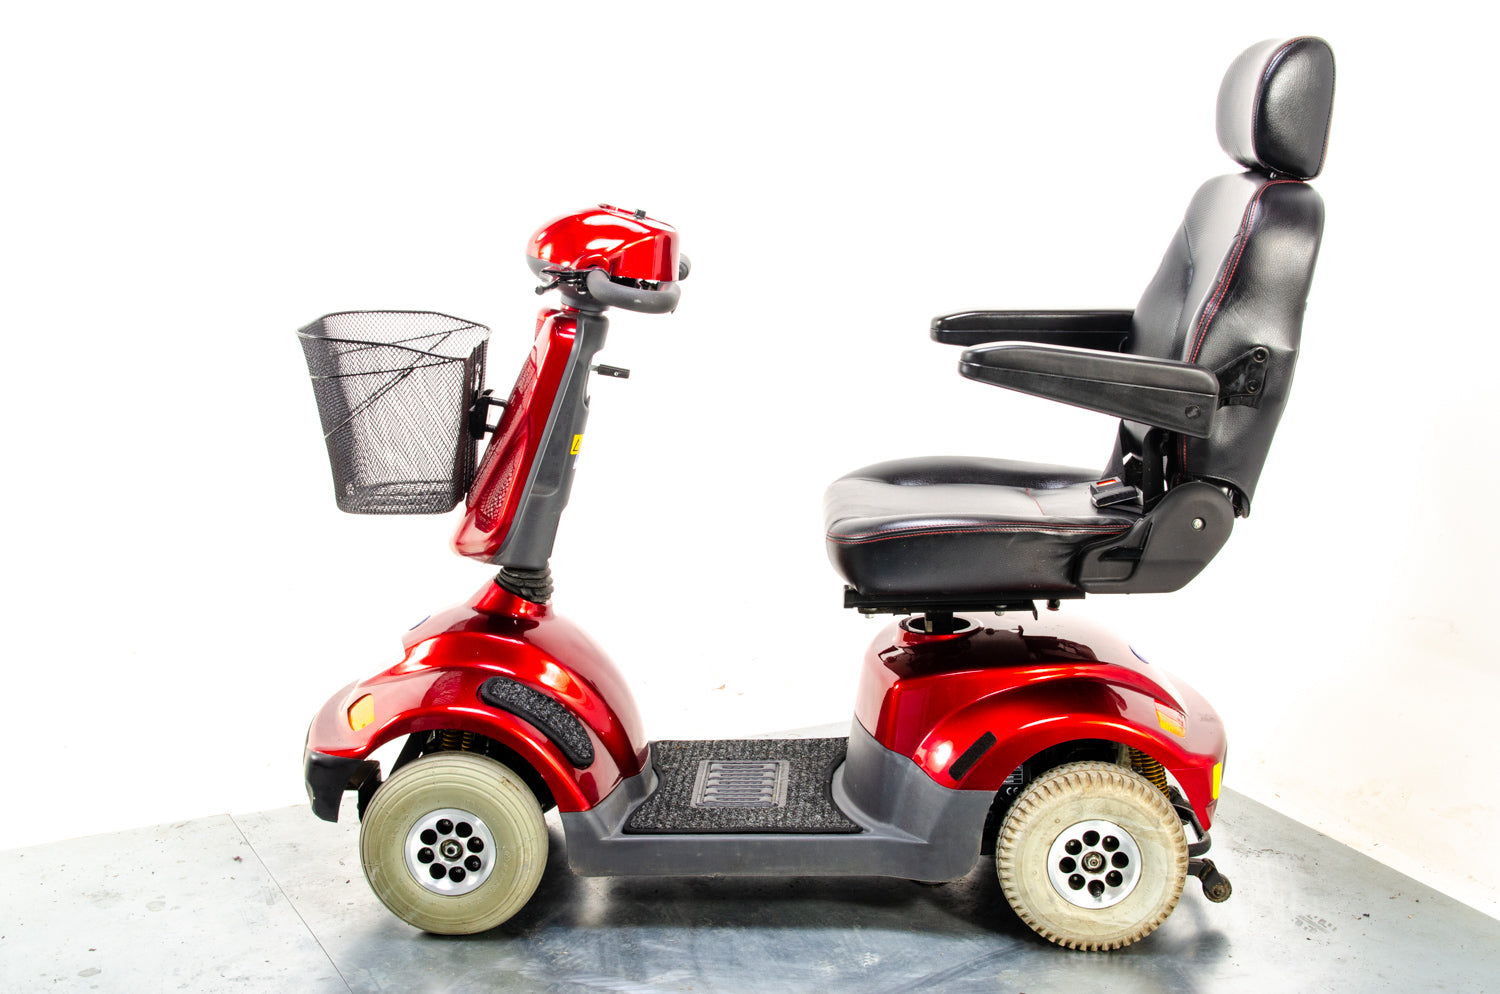 TGA Sonet Used Mobility Scooter 6mph Road Pavement 25 Stone Comfy Red 13374